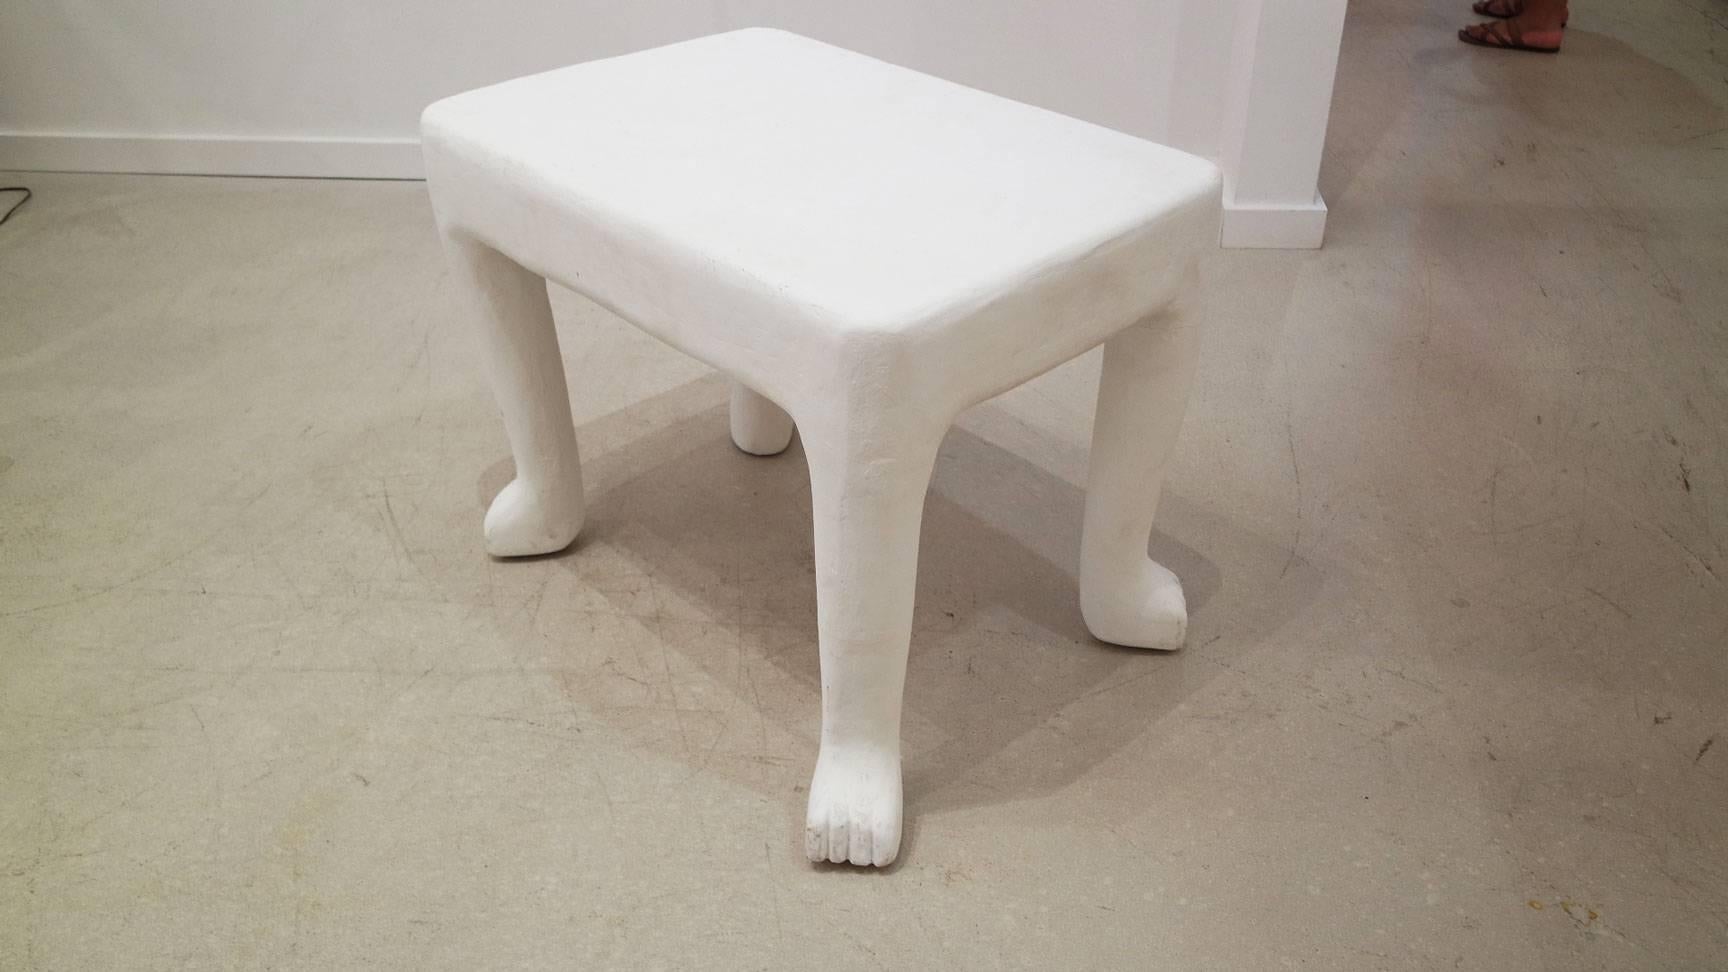 Authentic white plaster John Disckinson side table. The table has been vetted by the Estate of John Dickinson.